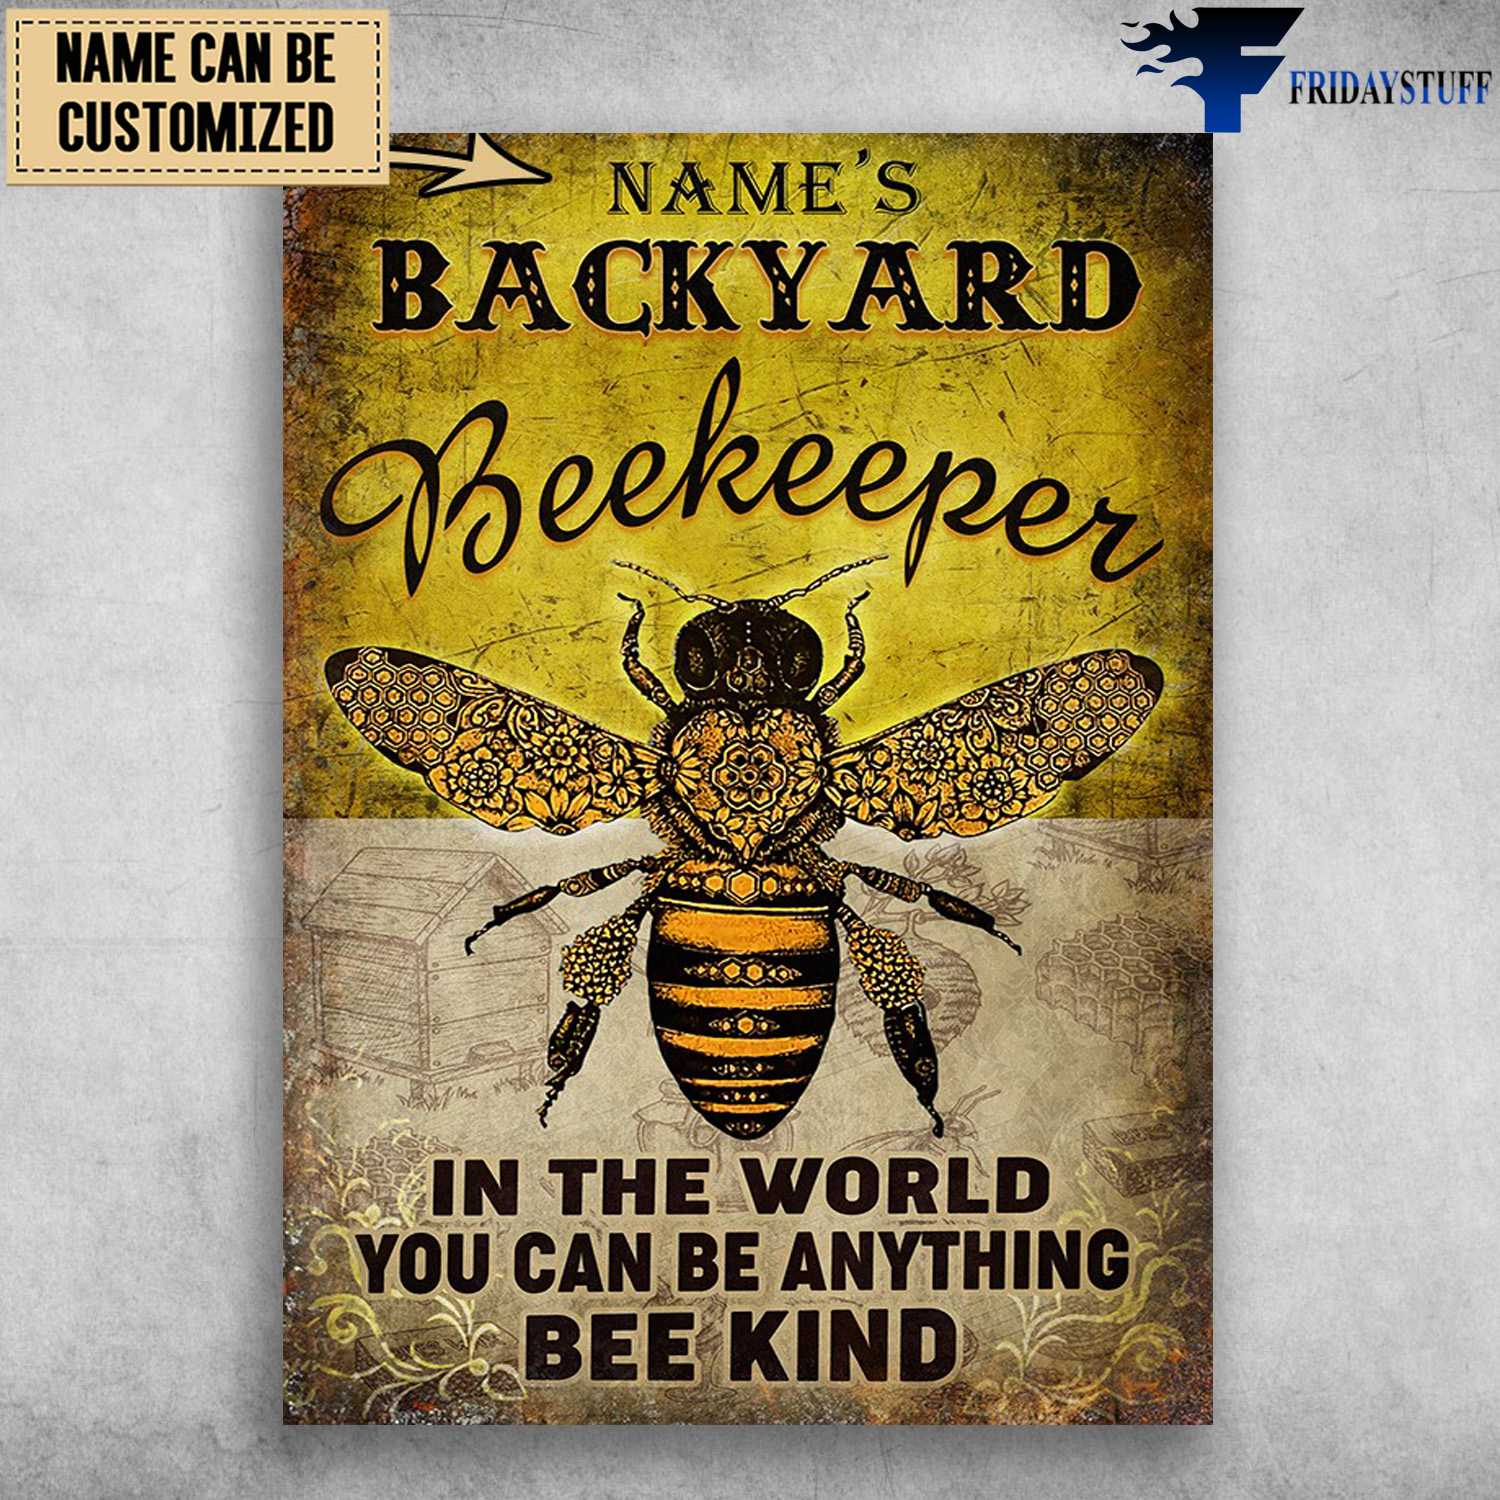 Beekeeper Backyard, In The World, You Can Be Anything, Bee Kind